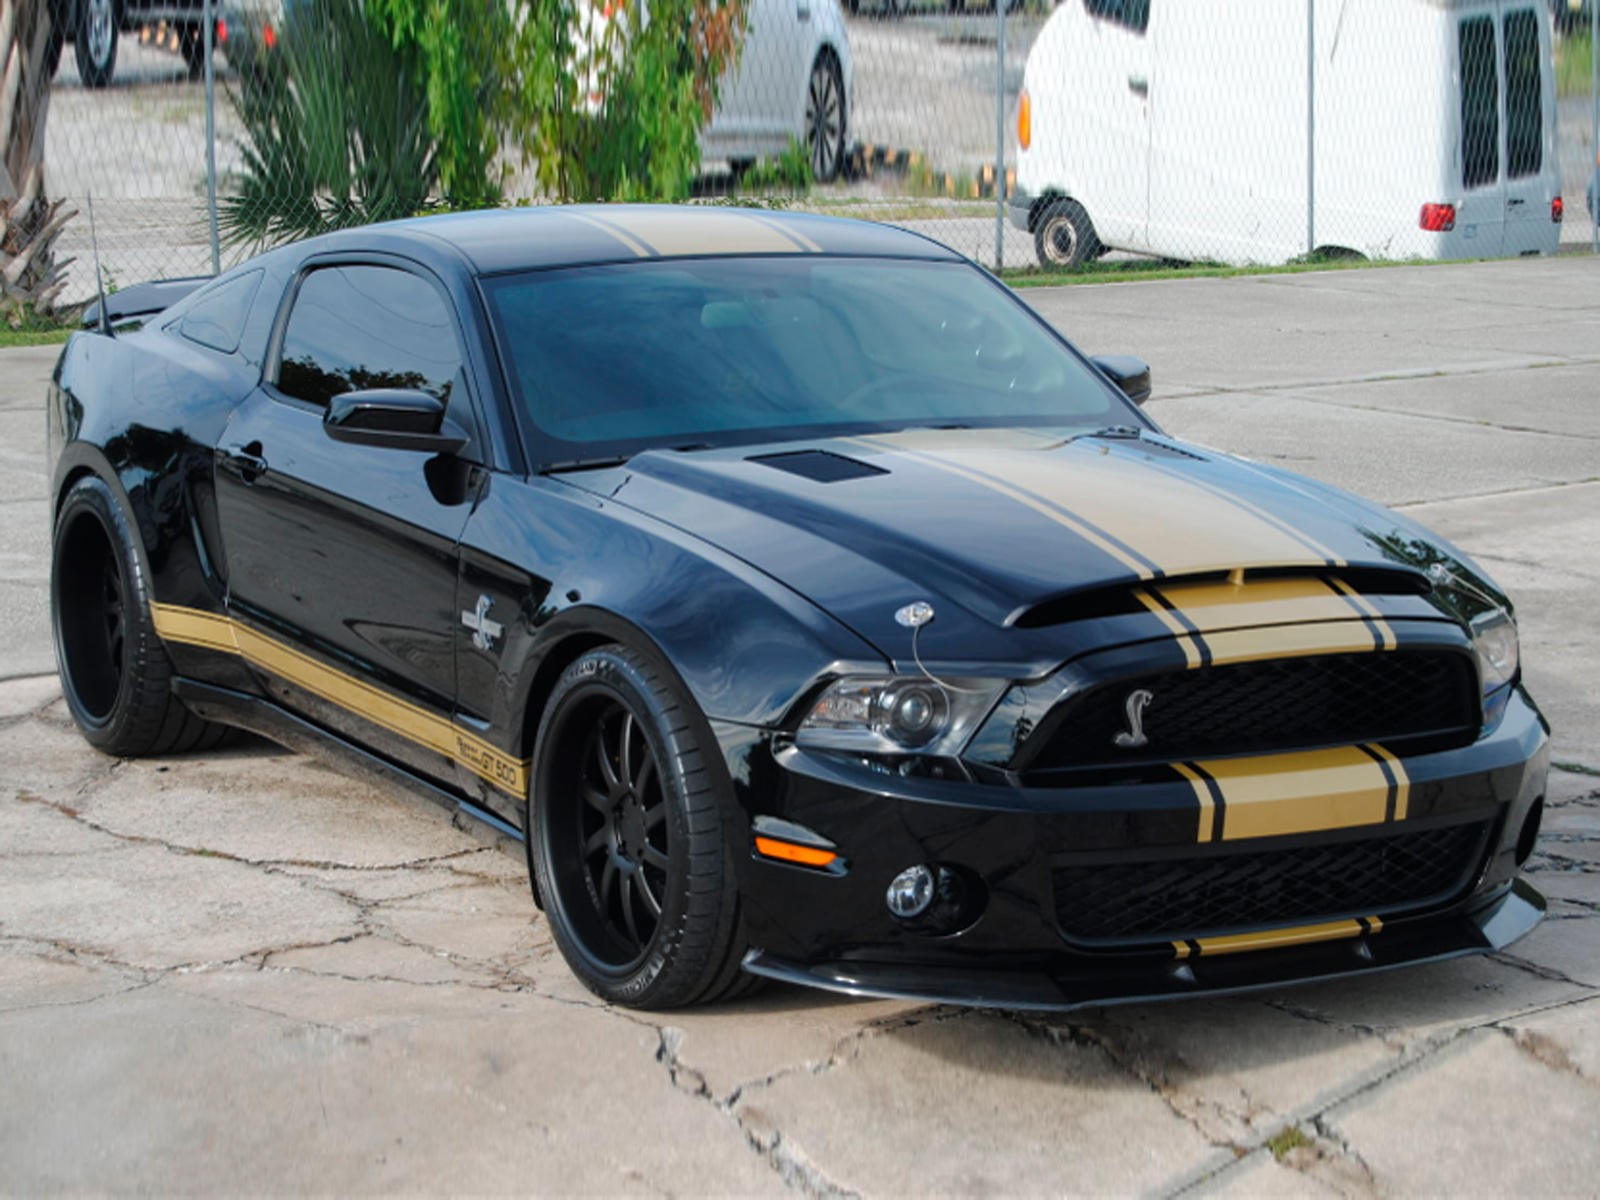 This 2012 Ford Shelby GT500 Super Snake Prototype Is Insanely Rare